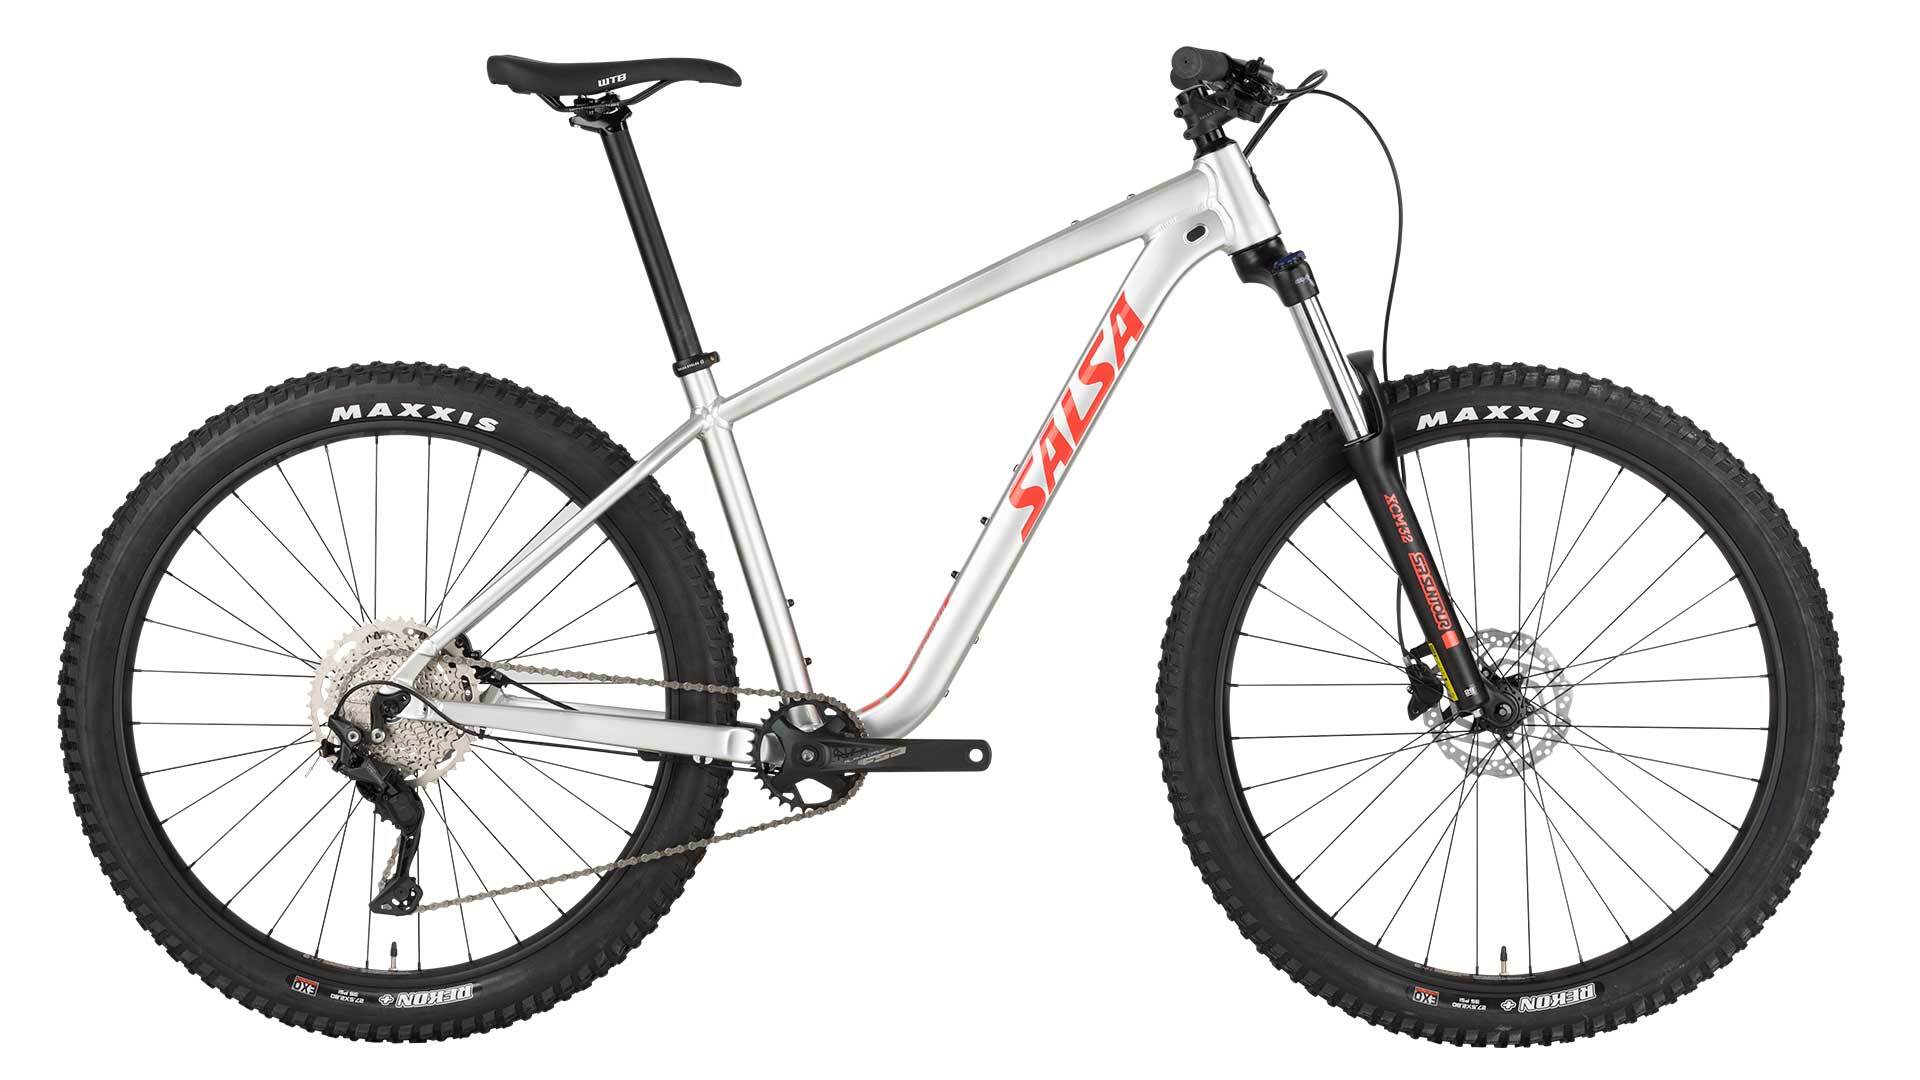 Deore 10 27.5+ | Salsa Cycles